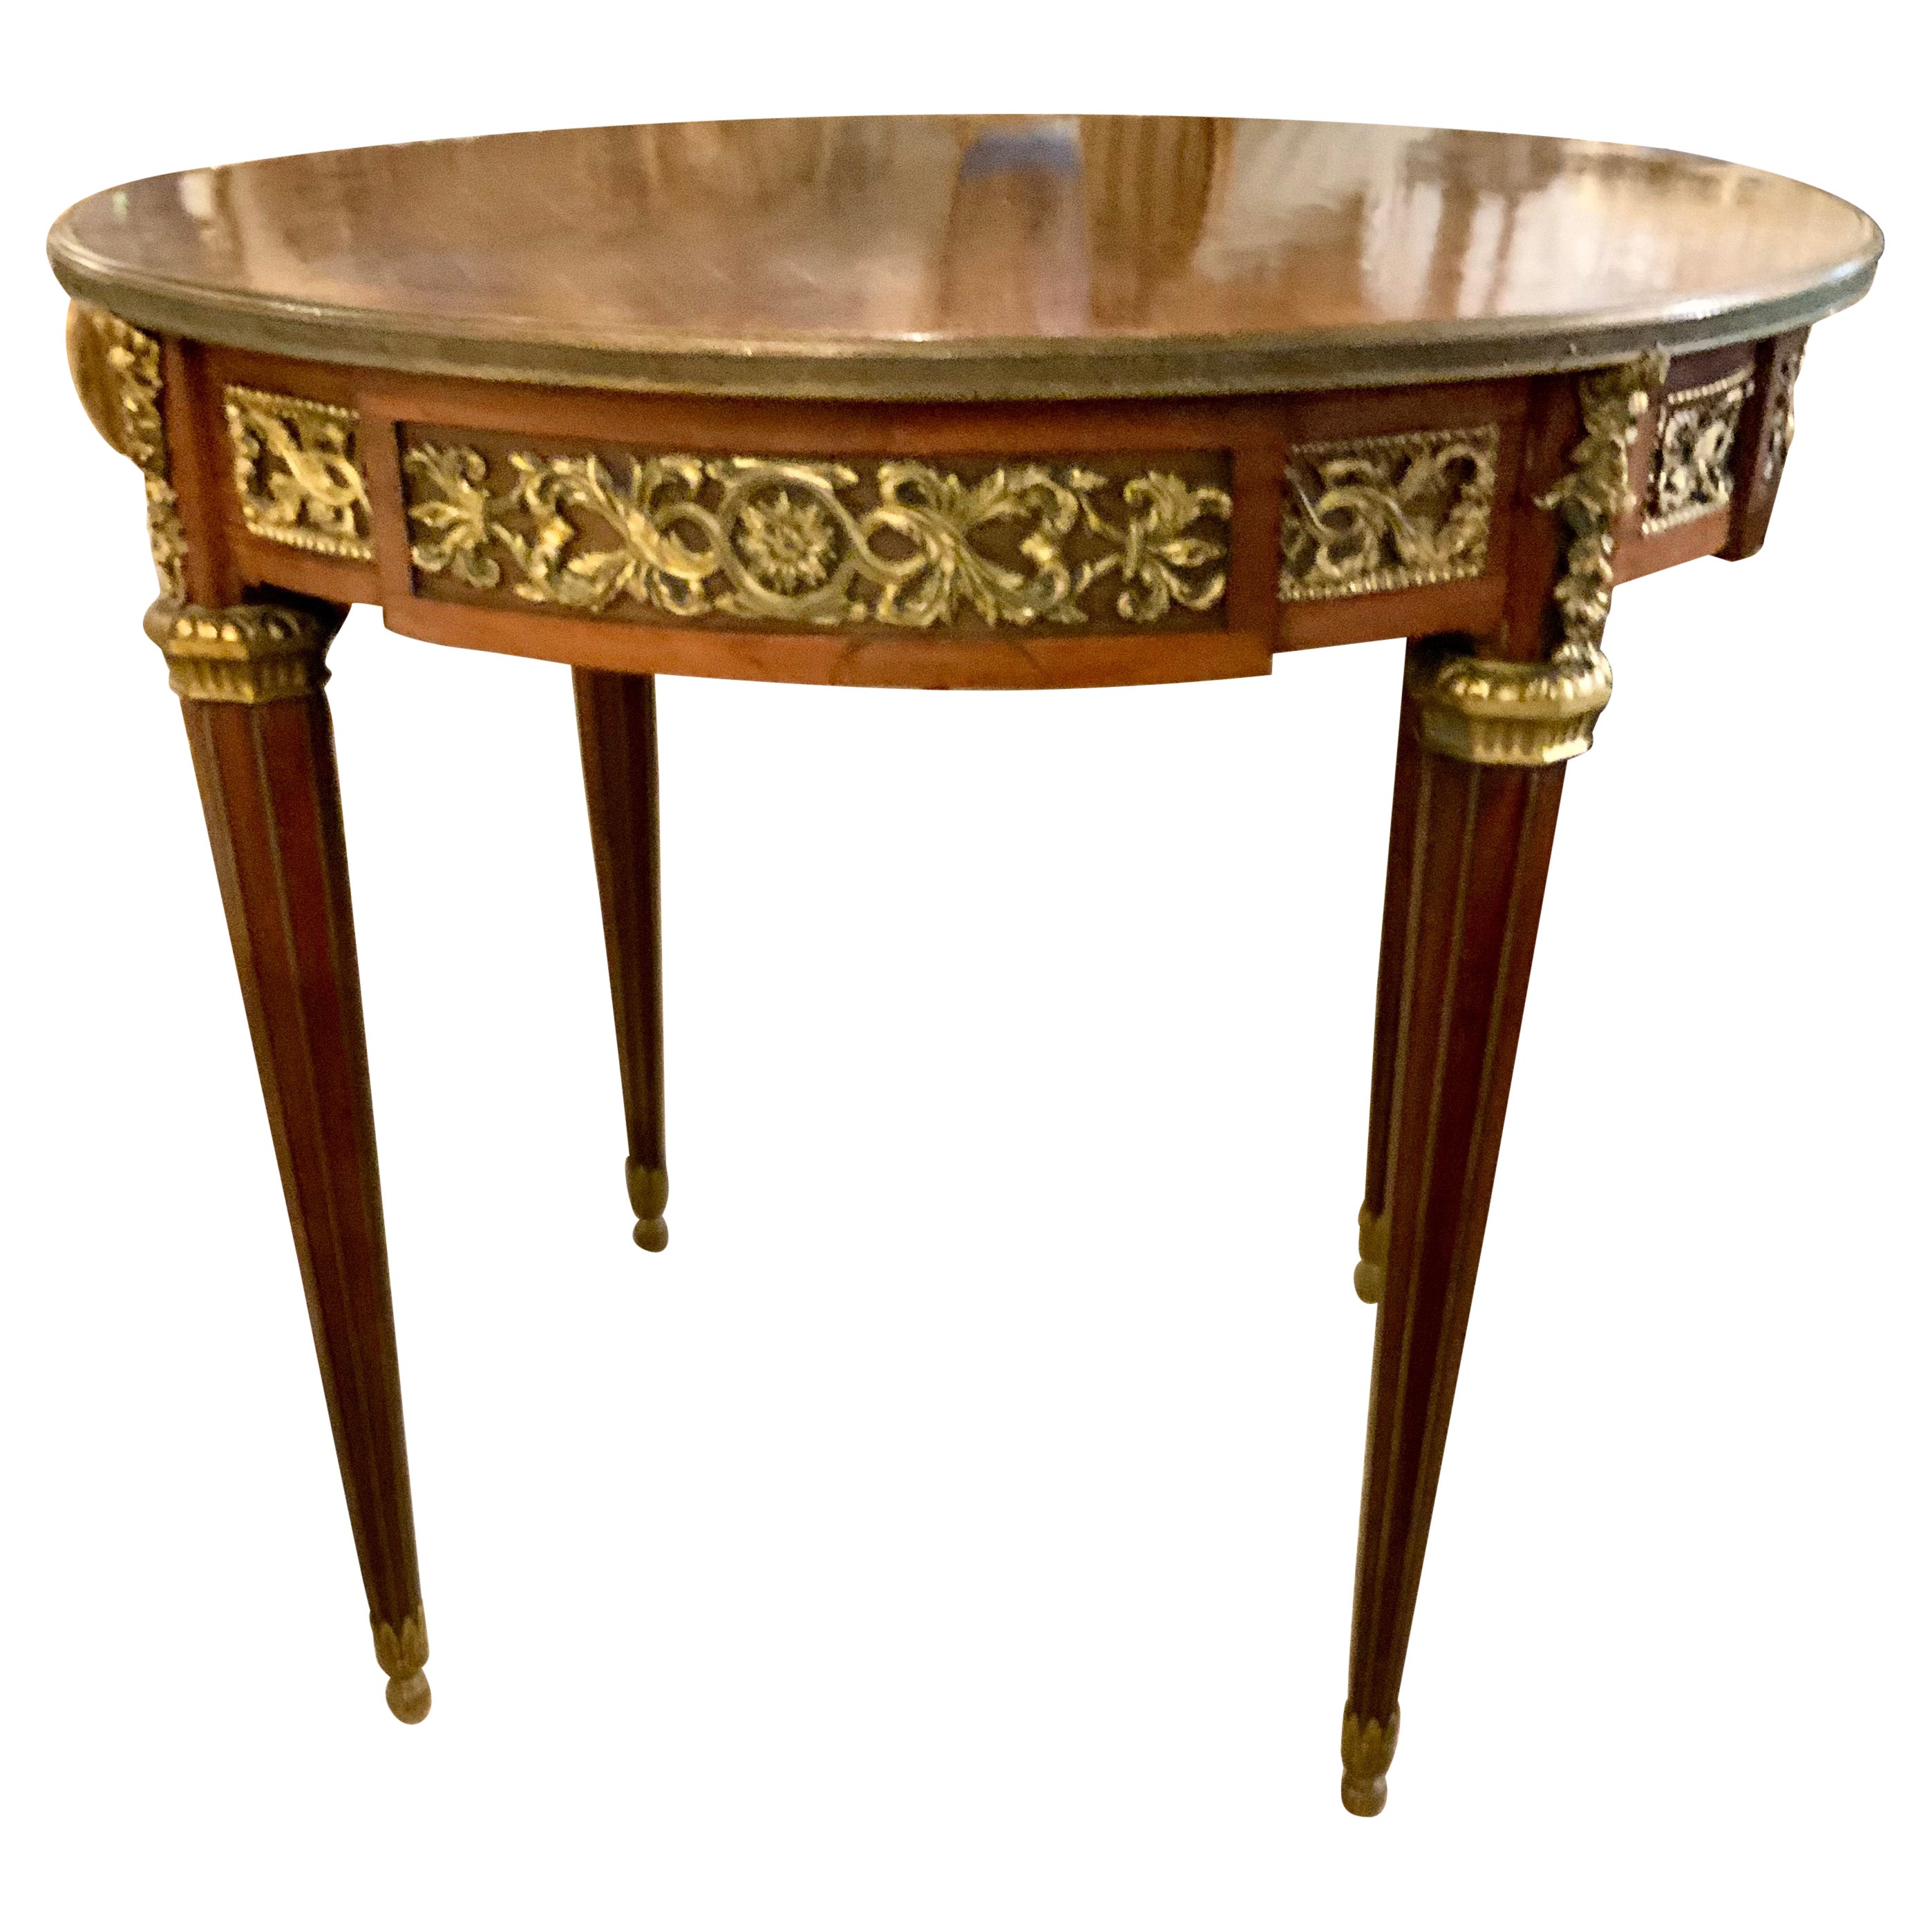 Louis XVI-Style Center Table in Kingwood with Ormolu Mounts For Sale